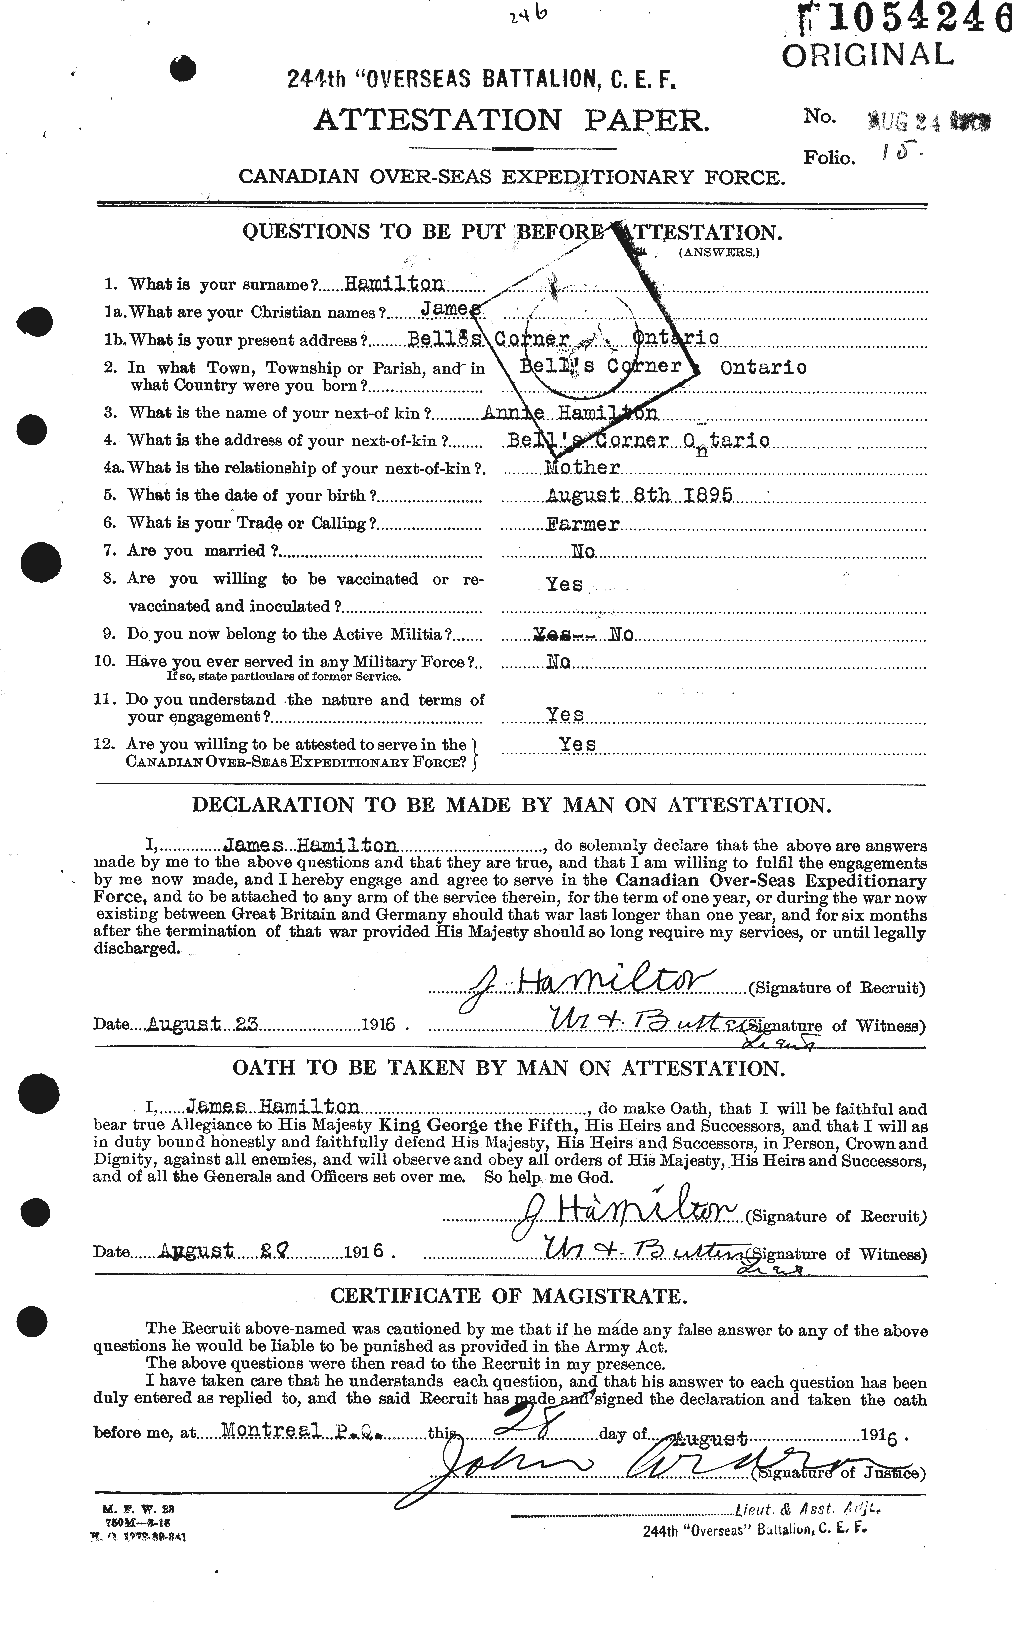 Personnel Records of the First World War - CEF 372955a